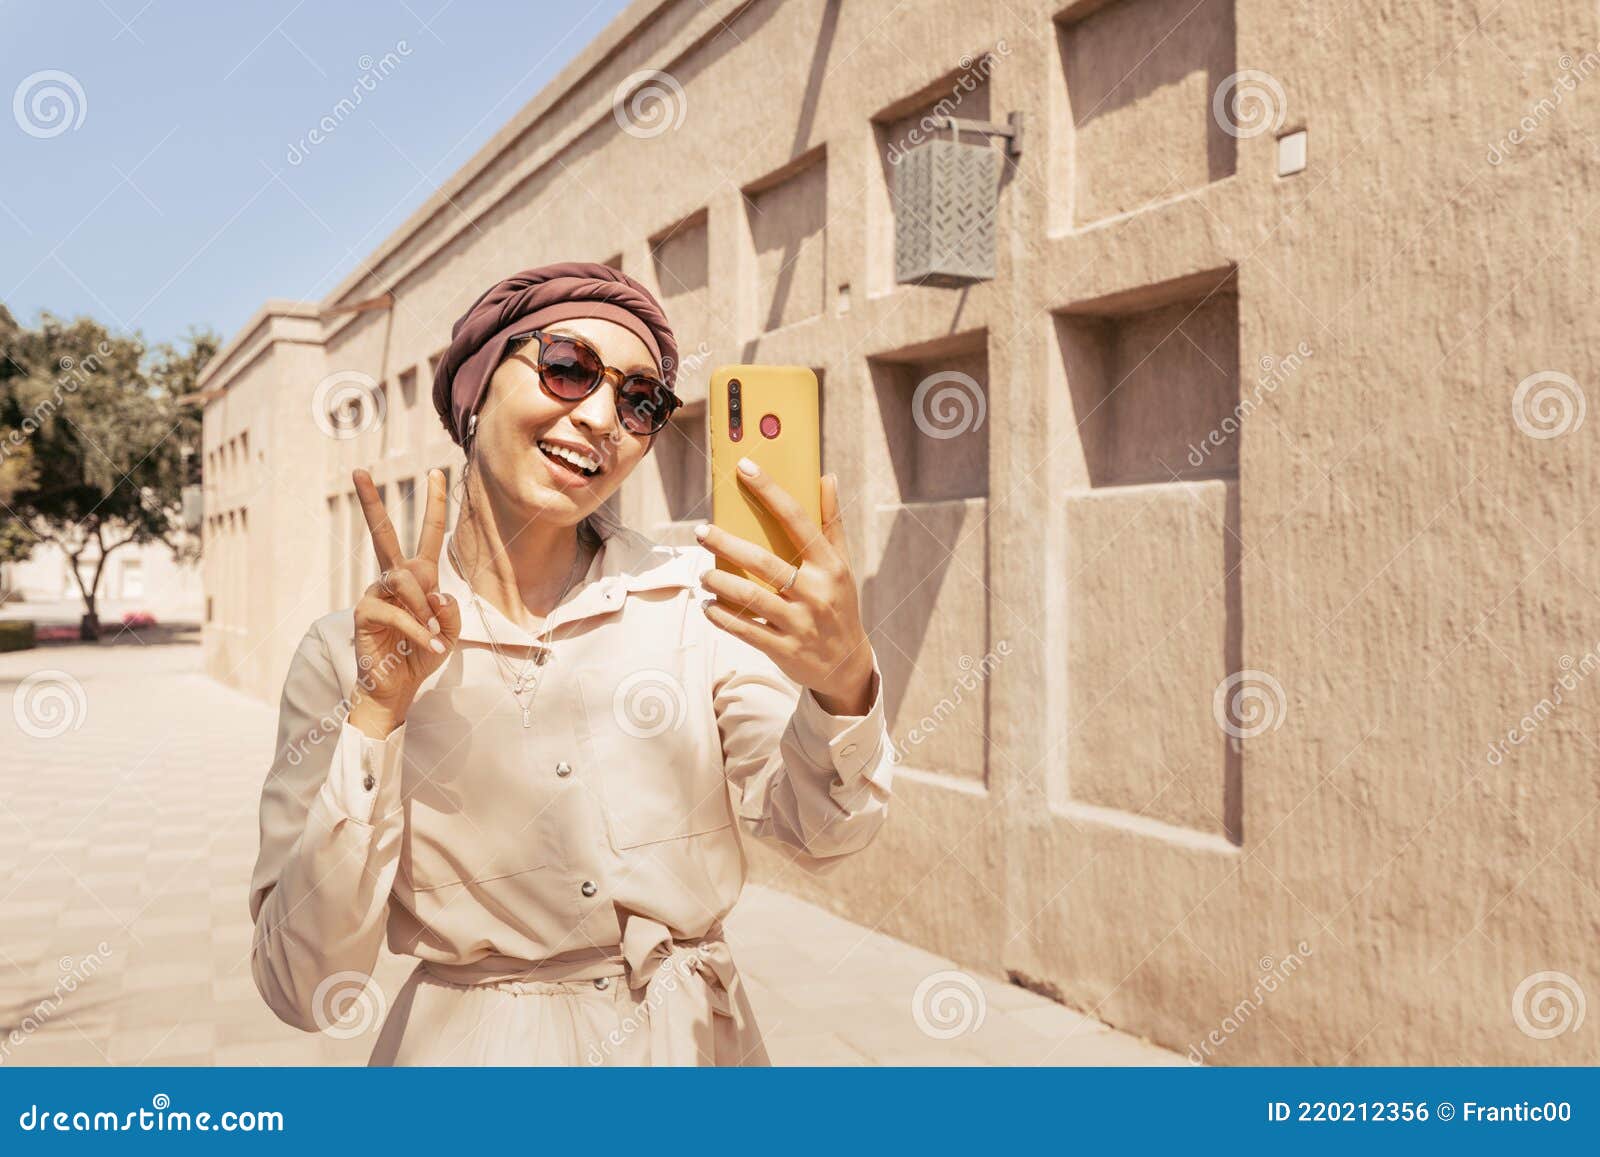 Woman Wearing a Turban Hat Takes a Selfie Against the Backdrop of a Desert  Fortress City on the Arabian Peninsula Stock Photo - Image of arabian,  islam: 220212356